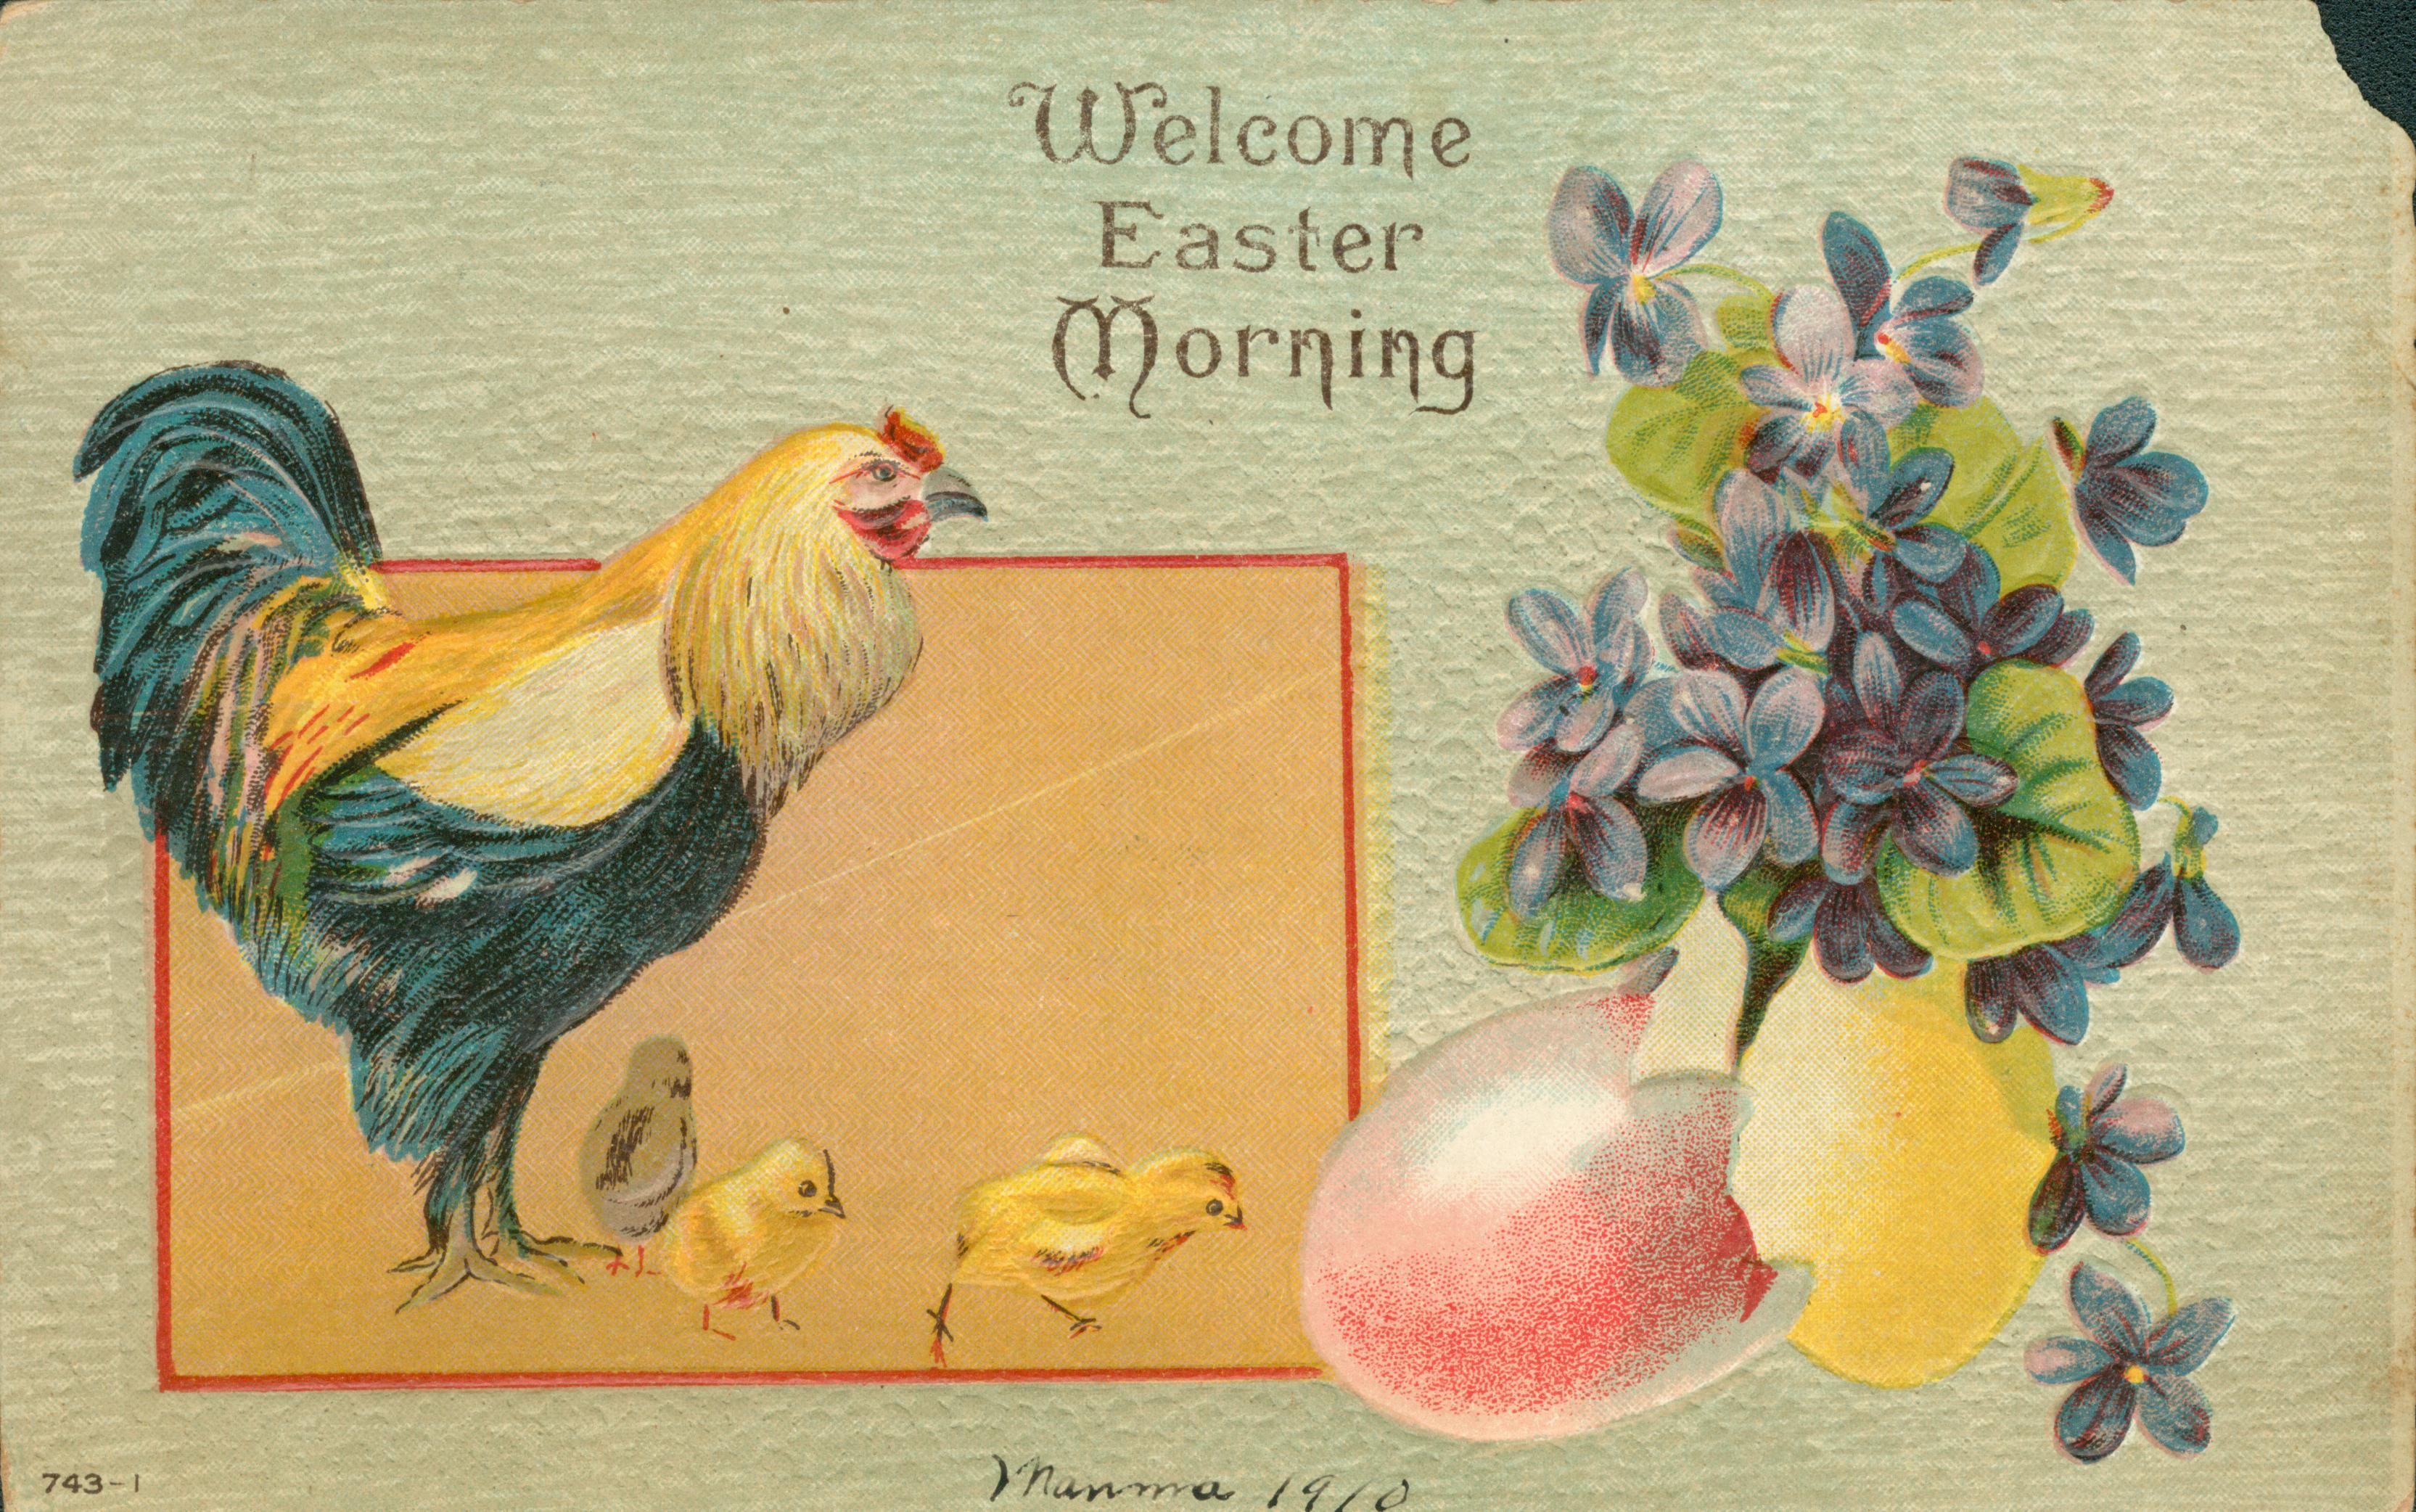 A chicken and three chicks nect to two colored eggs and some flowers.